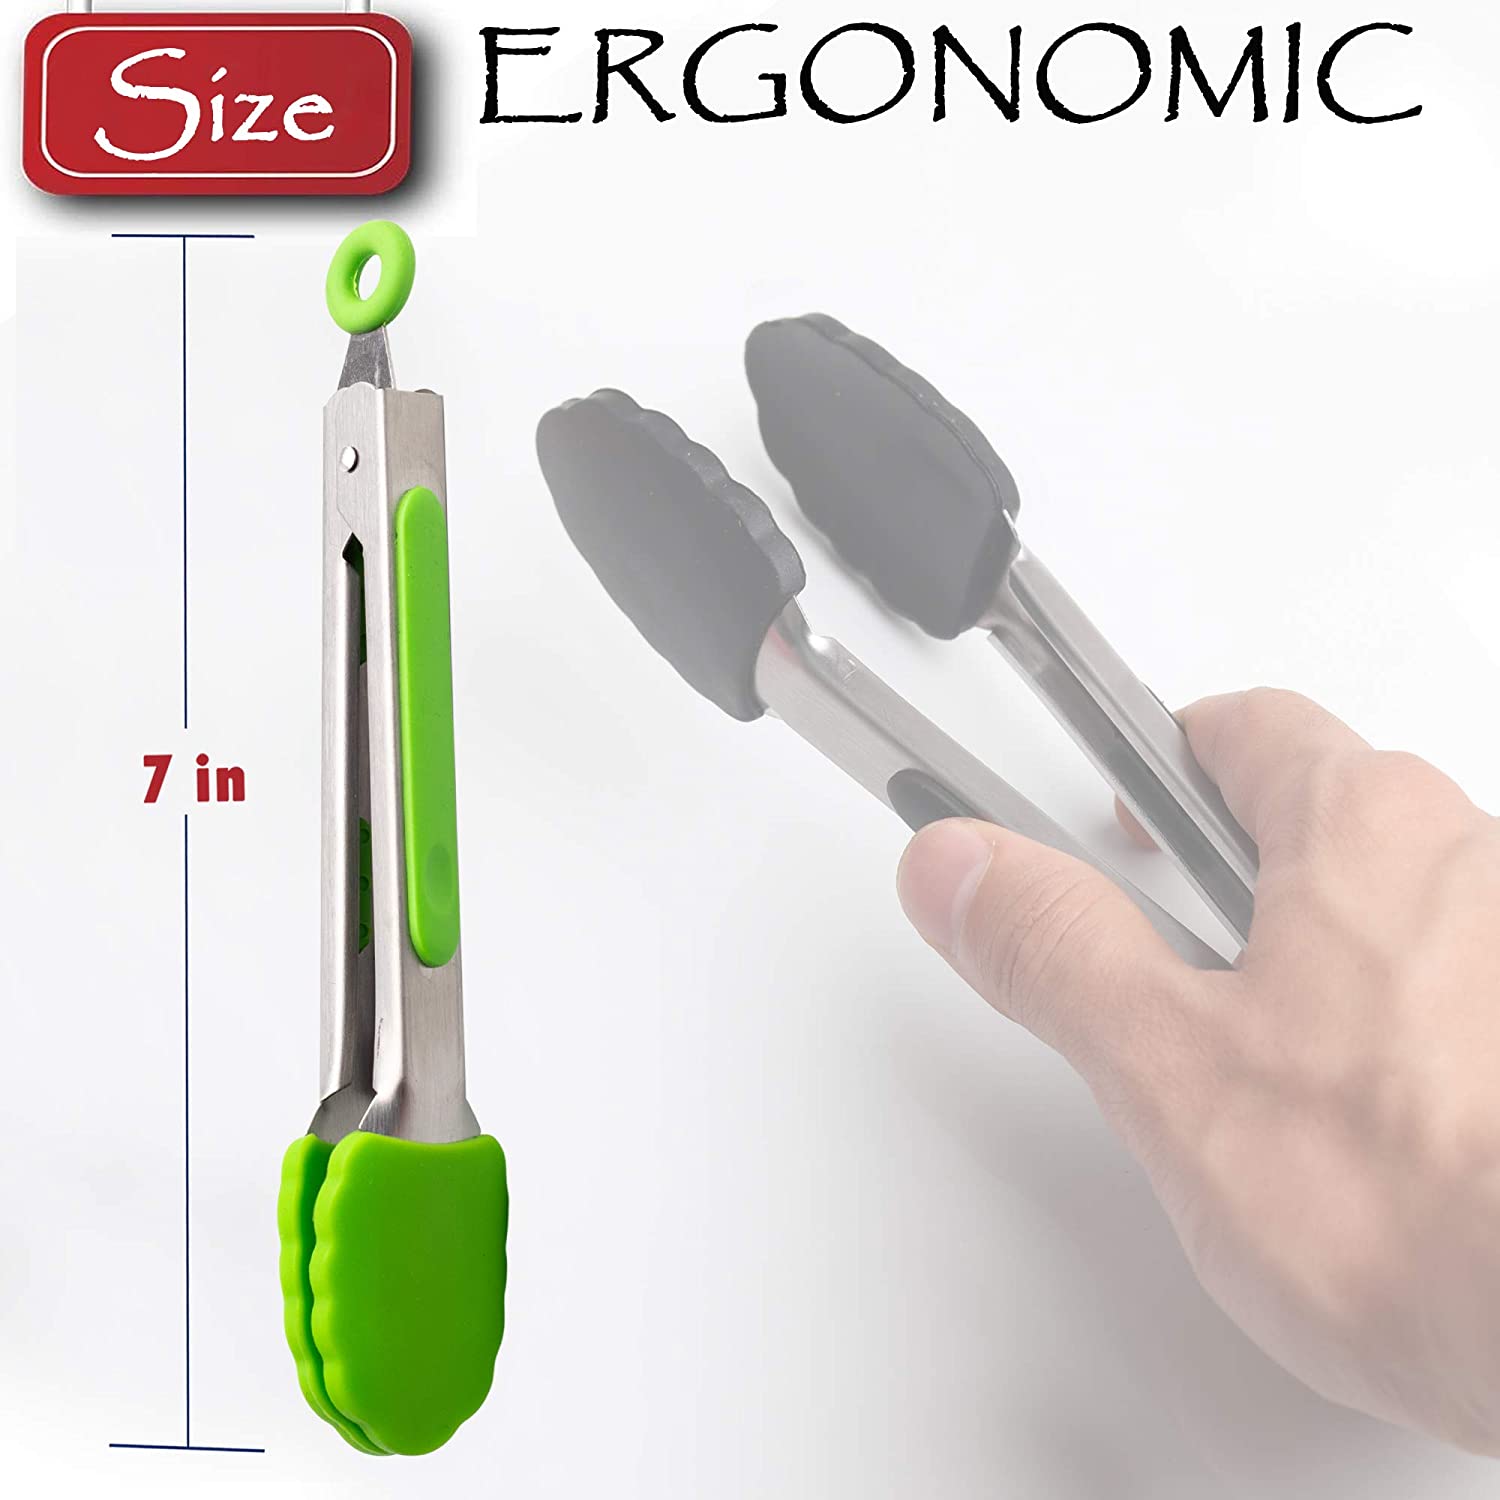 ExcelSteel 2 PC 7 Stainless Steel Silicone Mini Tongs, Black